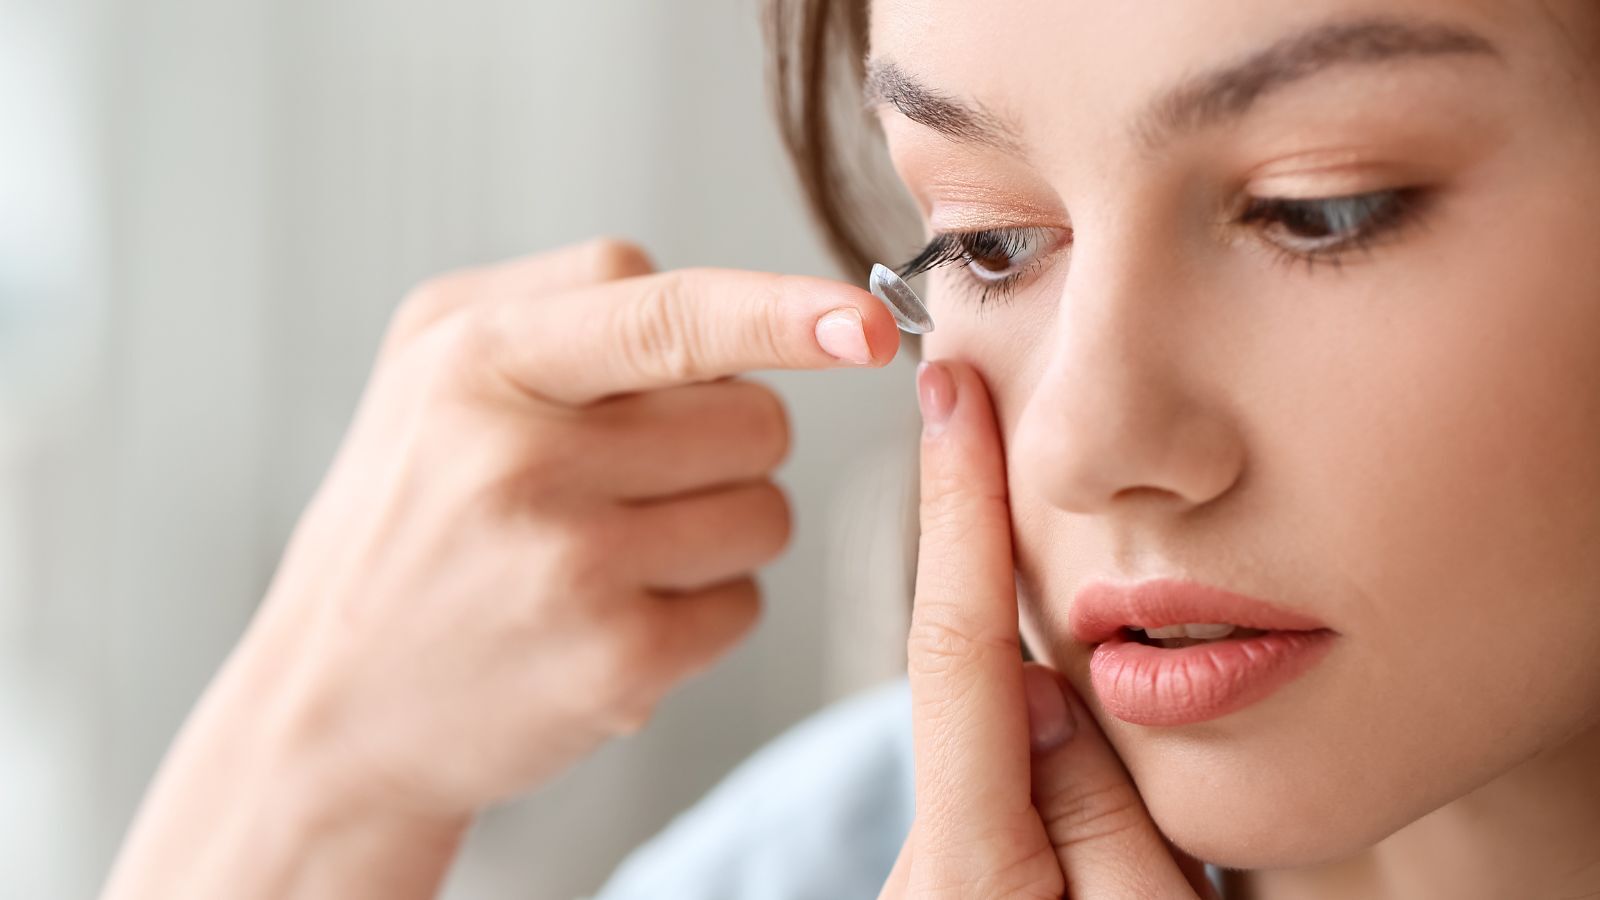 10 Best Contact Lenses Brands: Find The Right Lenses For You